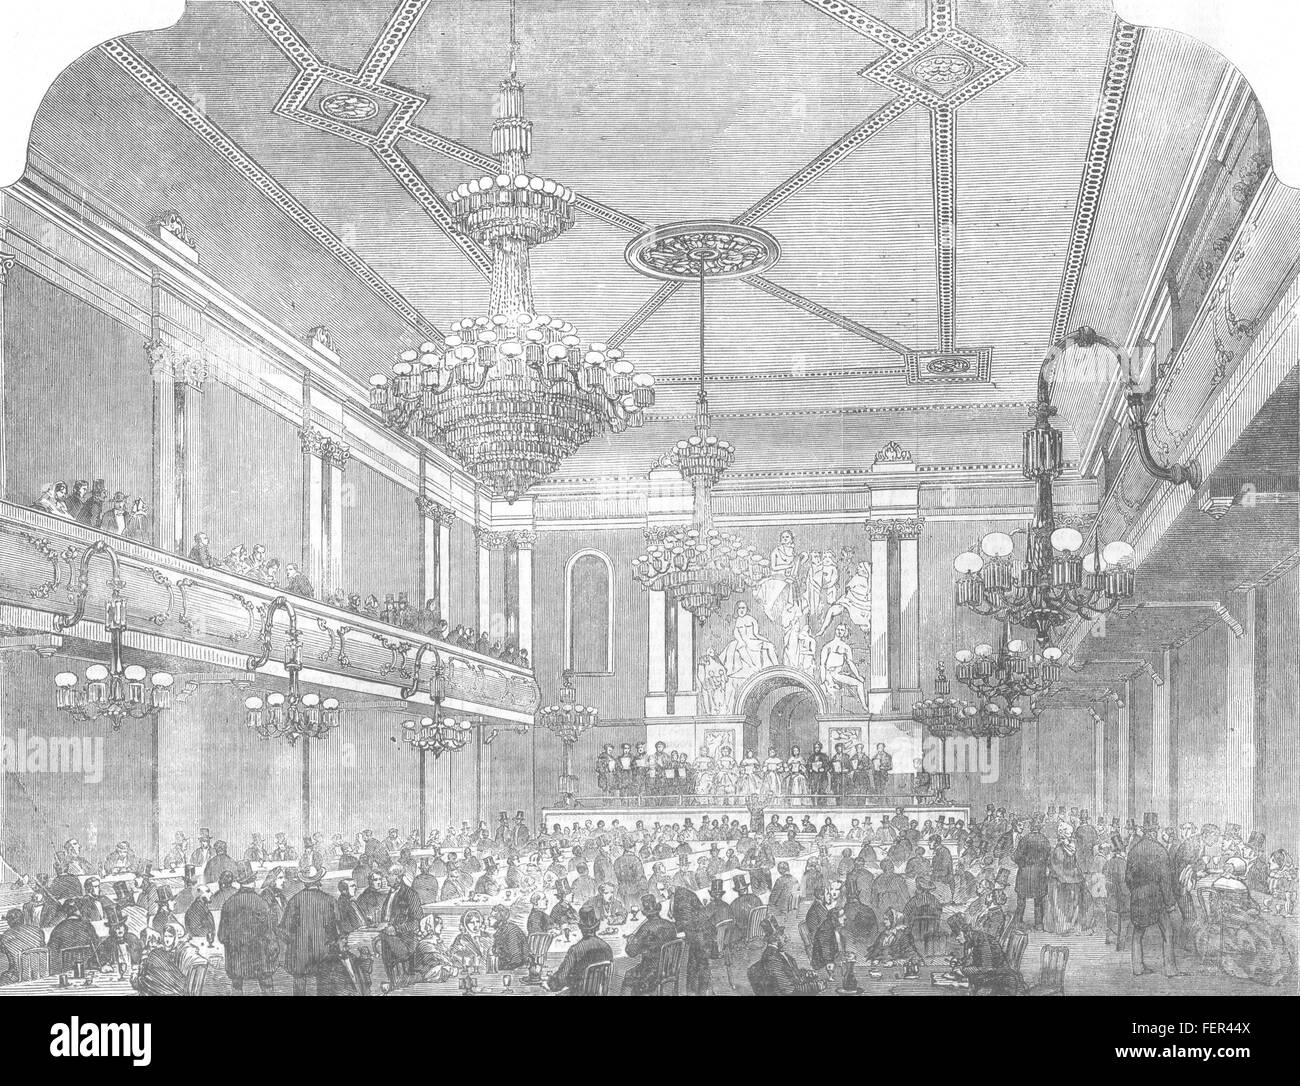 LAMBETH Canterbury Music Hall, Upper Marsh 1856. Illustrated London News Banque D'Images